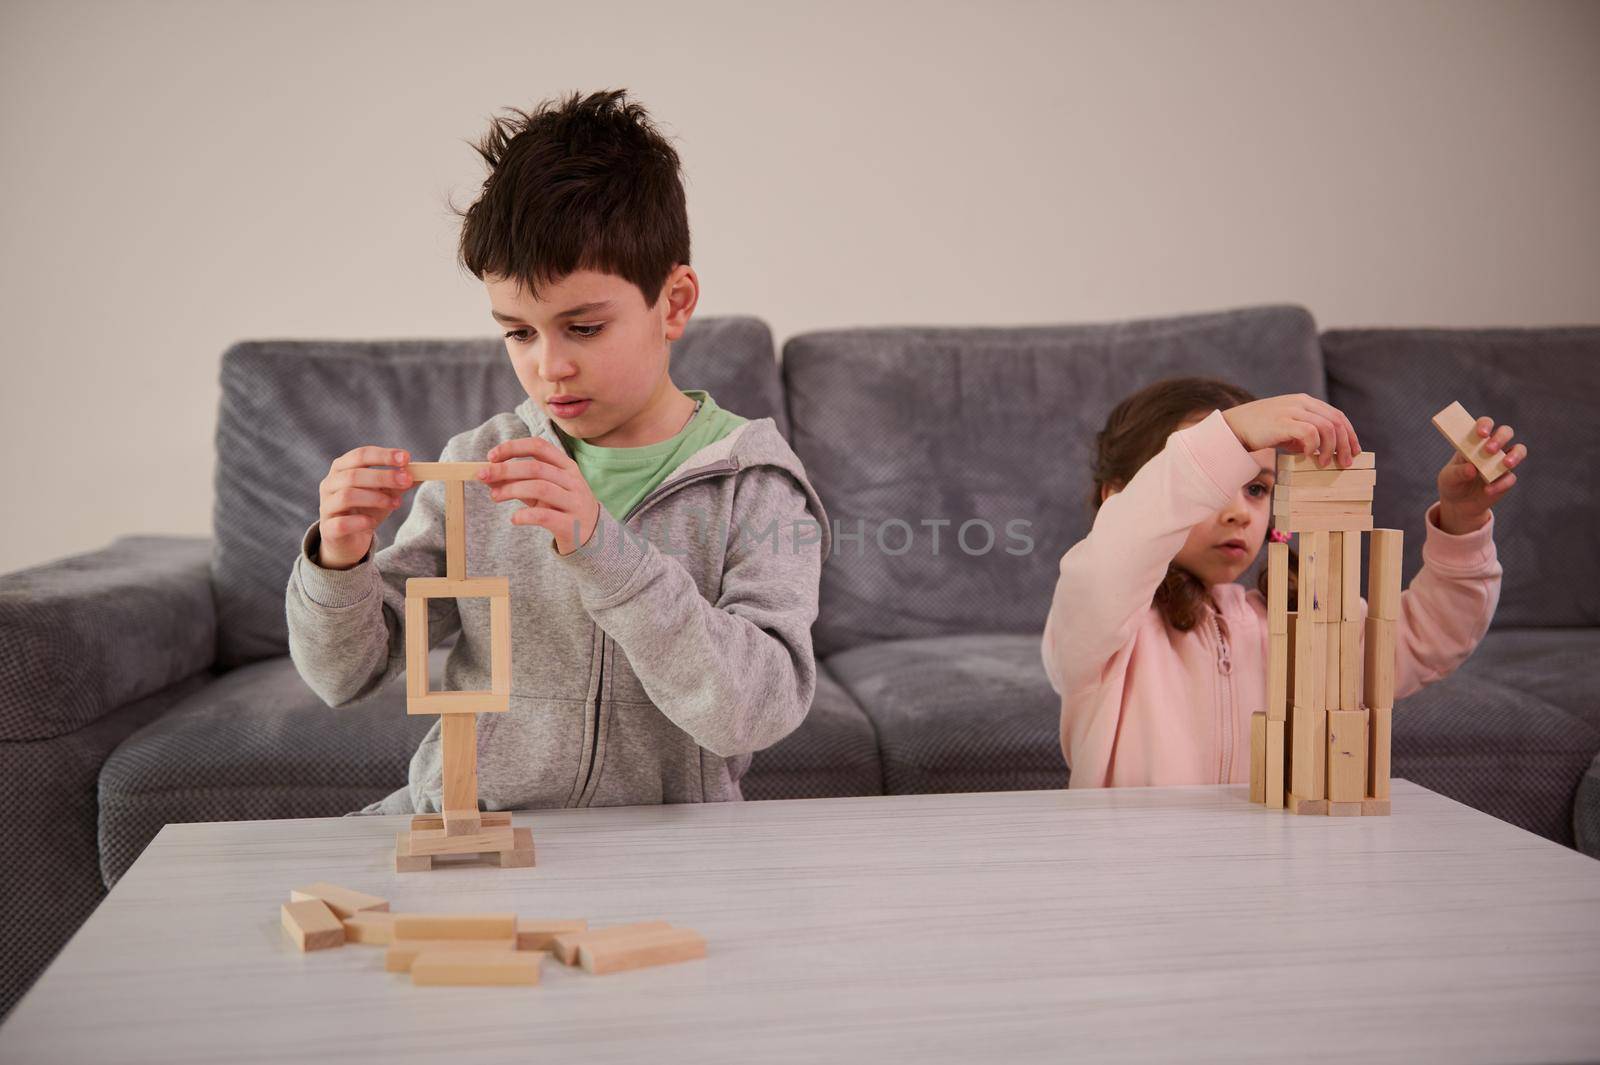 Creative kids, brother and sister concentrated on building from wooden blocks, playing developmental board games, building complex tall wooden structures at home. Educational leisure and pastime